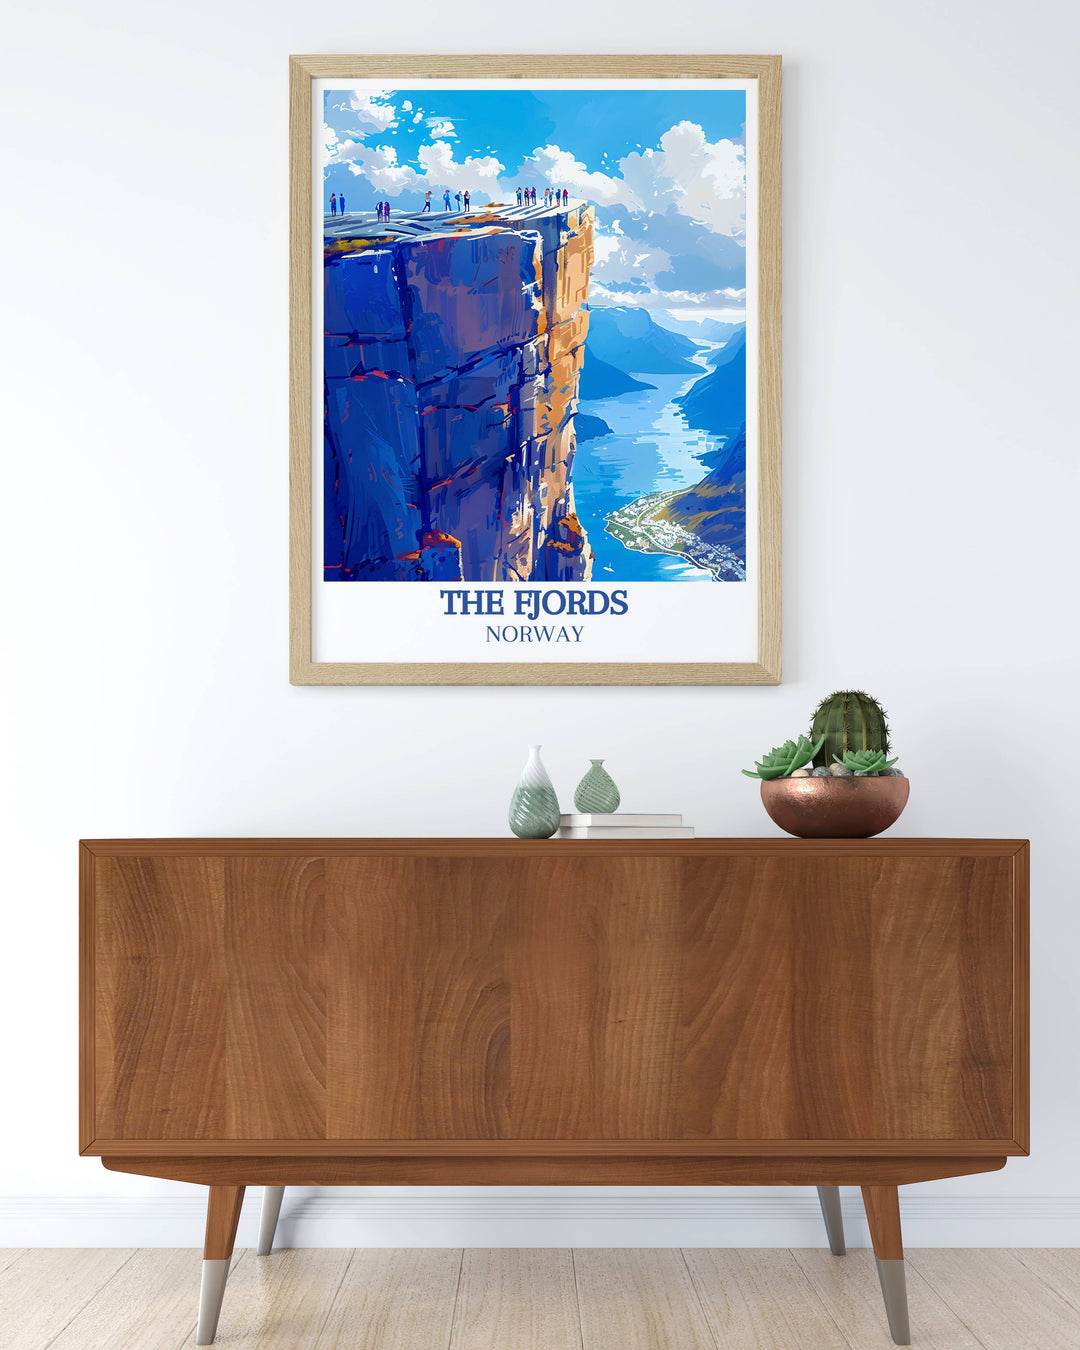 Norway prints and posters celebrating the countrys rich natural beauty and cultural heritage, from dramatic fjords to charming coastal villages, perfect for adding Scandinavian charm to your home.